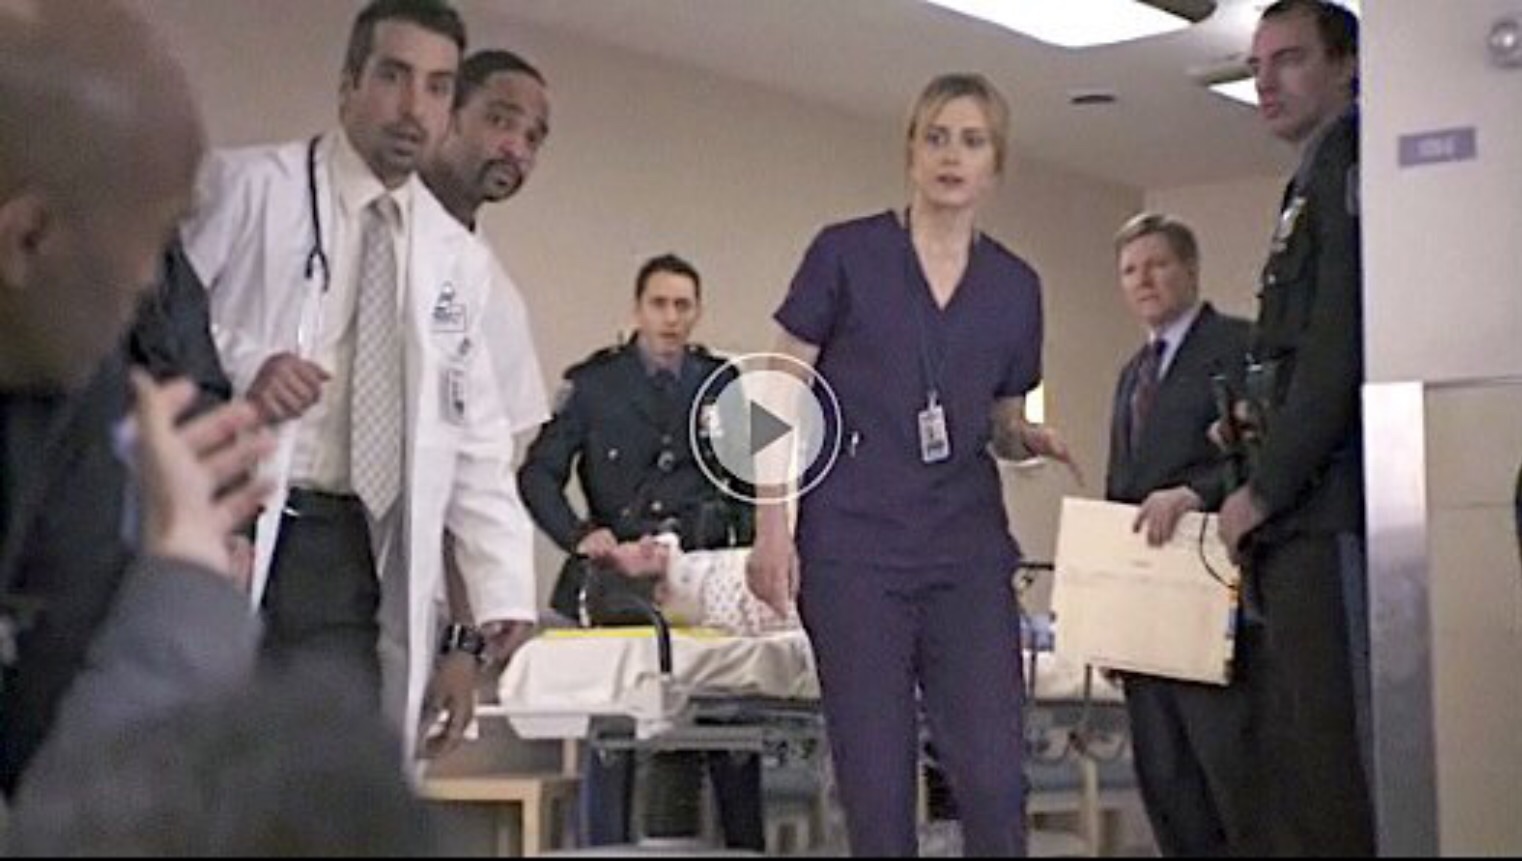 on set of NBC show, MERCY hospital. (Dennis Jay Funny, Taylor Schilling)